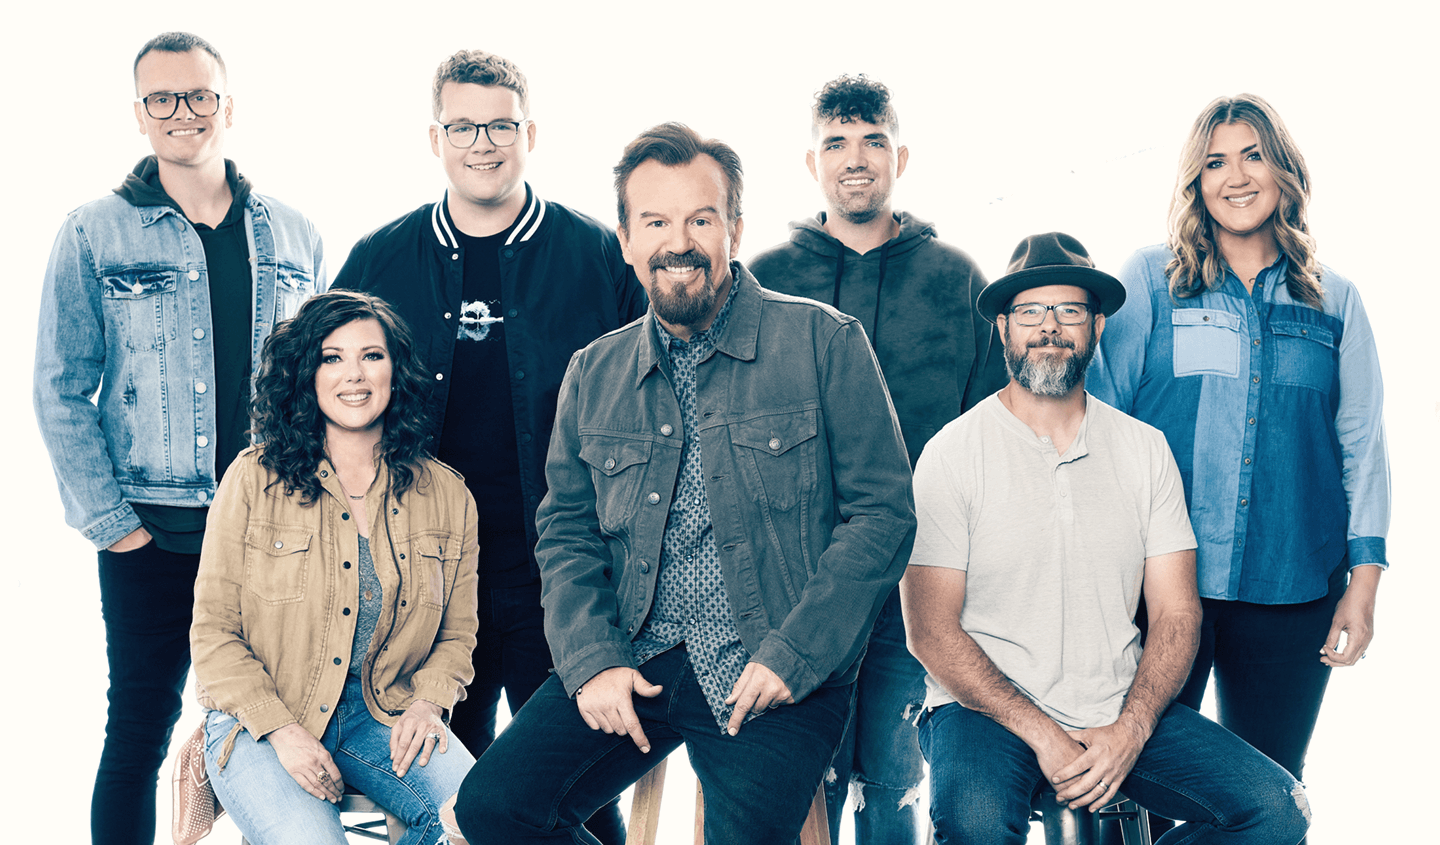 Casting Crowns Official Site